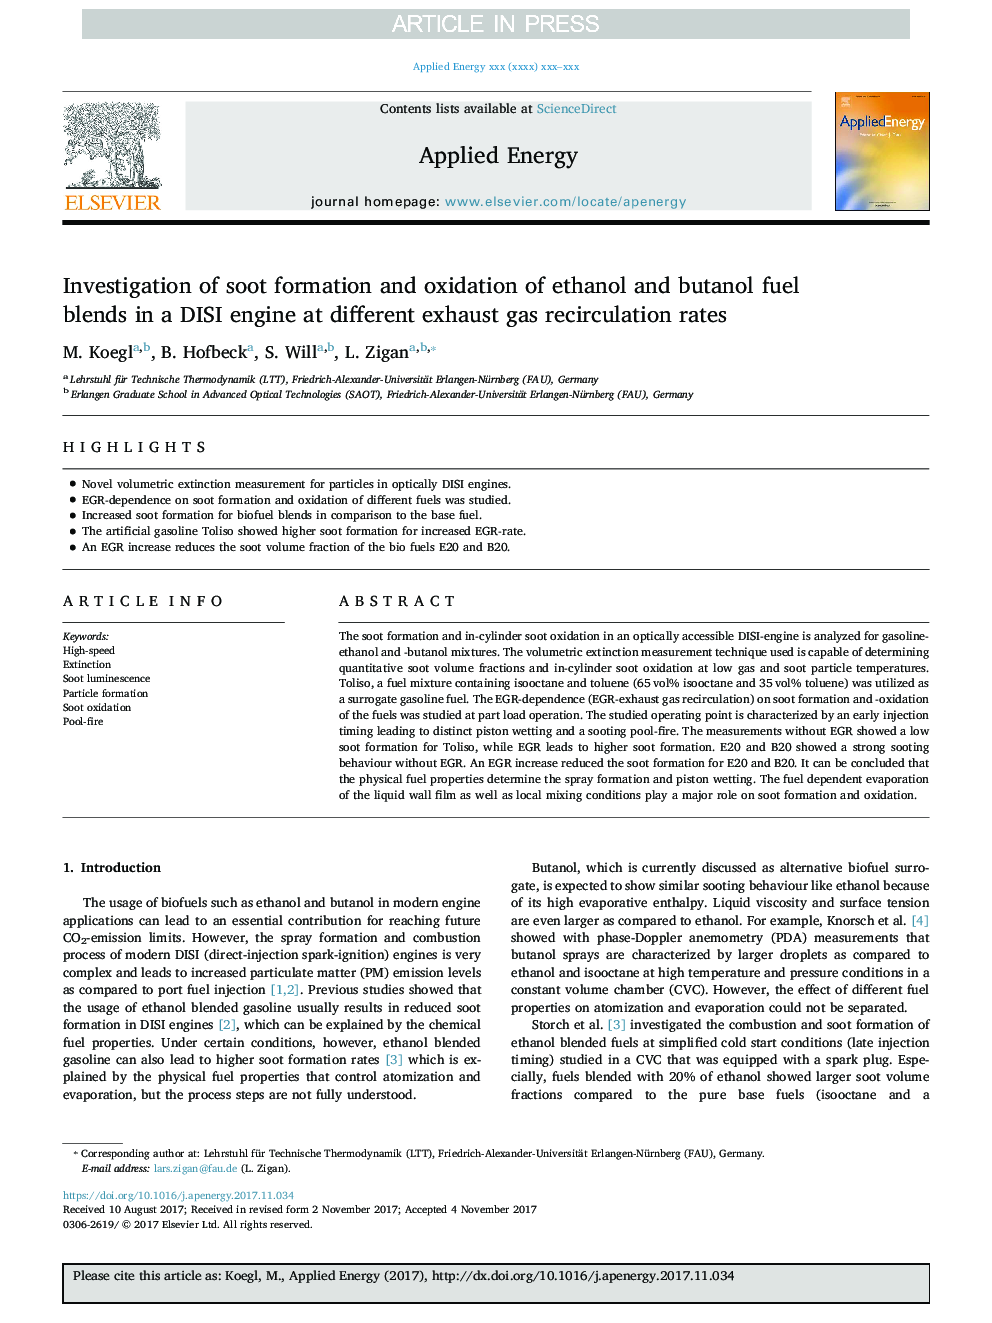 Investigation of soot formation and oxidation of ethanol and butanol fuel blends in a DISI engine at different exhaust gas recirculation rates